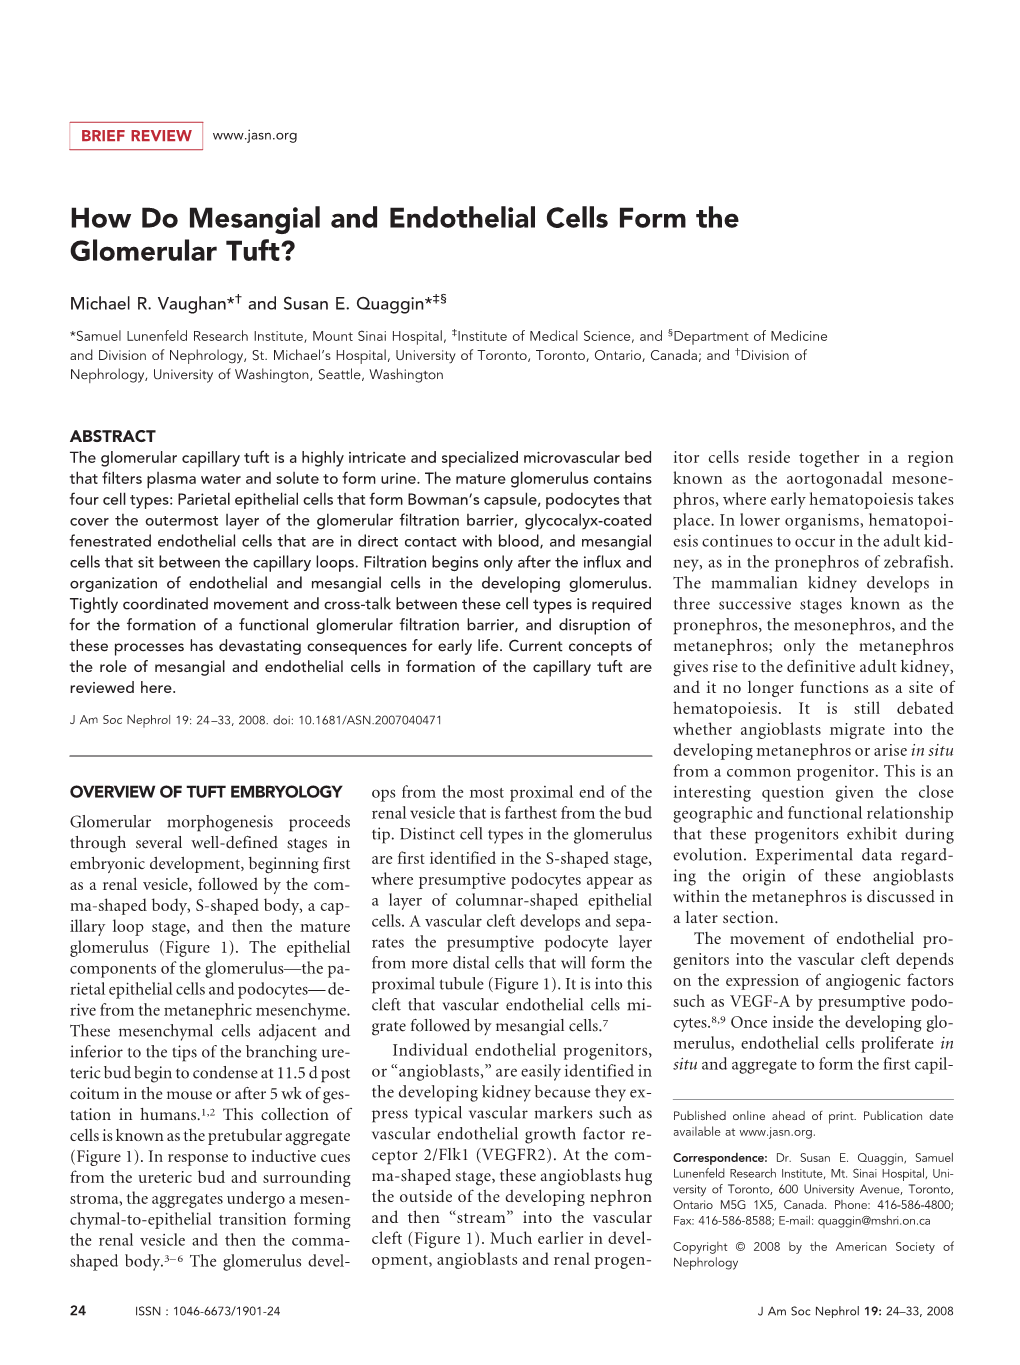 How Do Mesangial and Endothelial Cells Form the Glomerular Tuft?